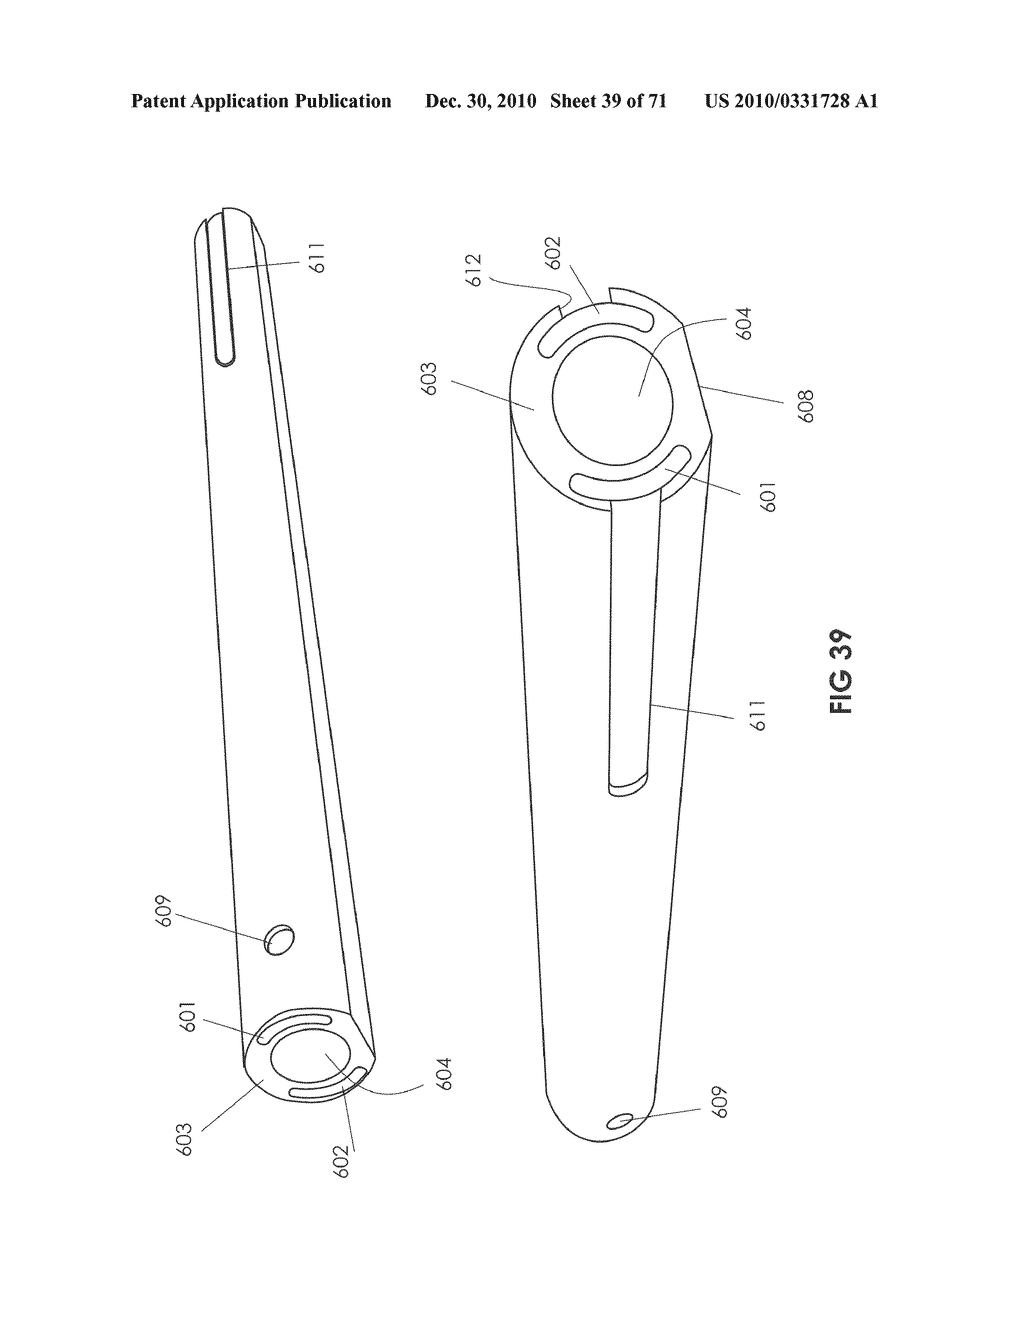 INTEGRATED DEVICES HAVING EXTRUDED ELECTRODE STRUCTURES AND METHODS OF USING SAME - diagram, schematic, and image 40